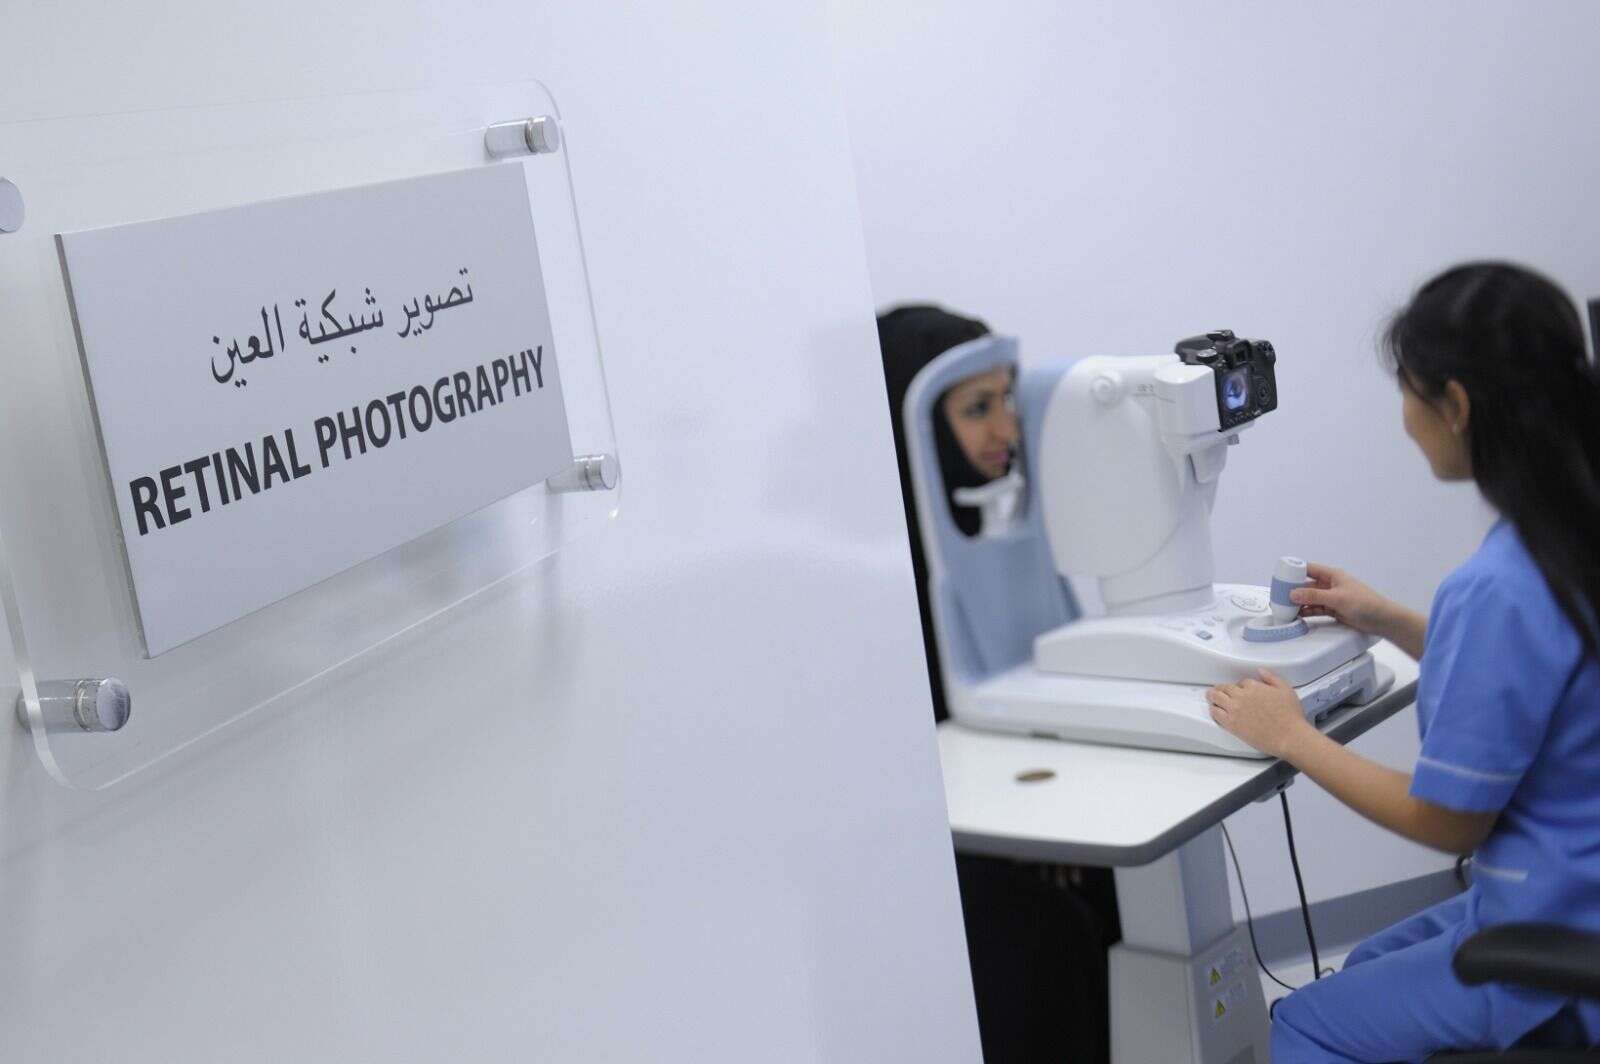 abu dhabi: new diabetes facility to come up in al dhafra